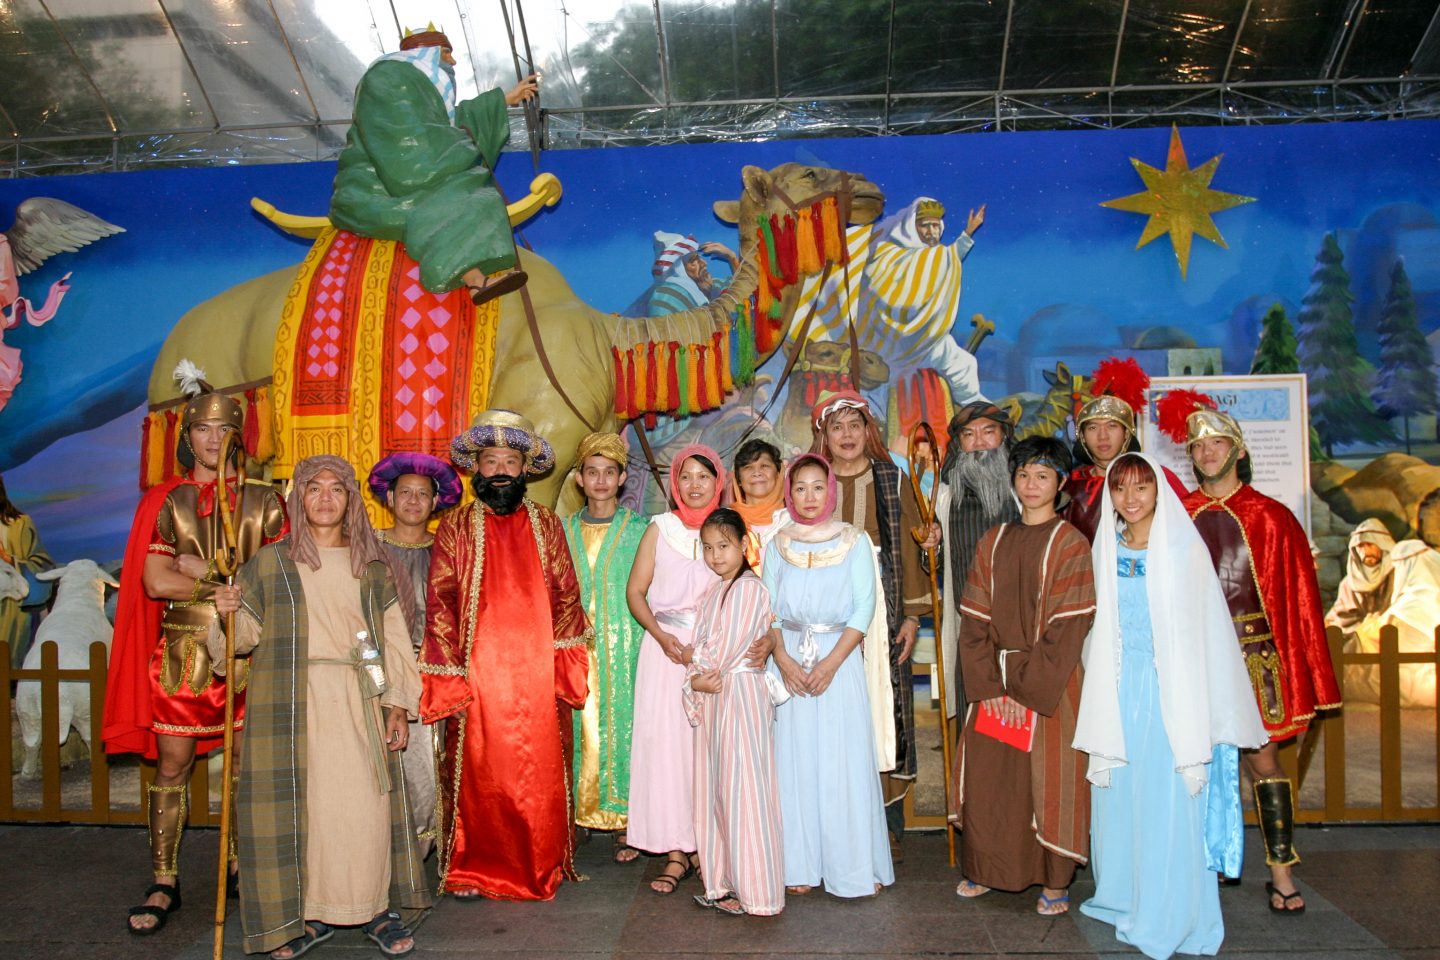 Previous CCIS events had live performances that tell the Christmas story.